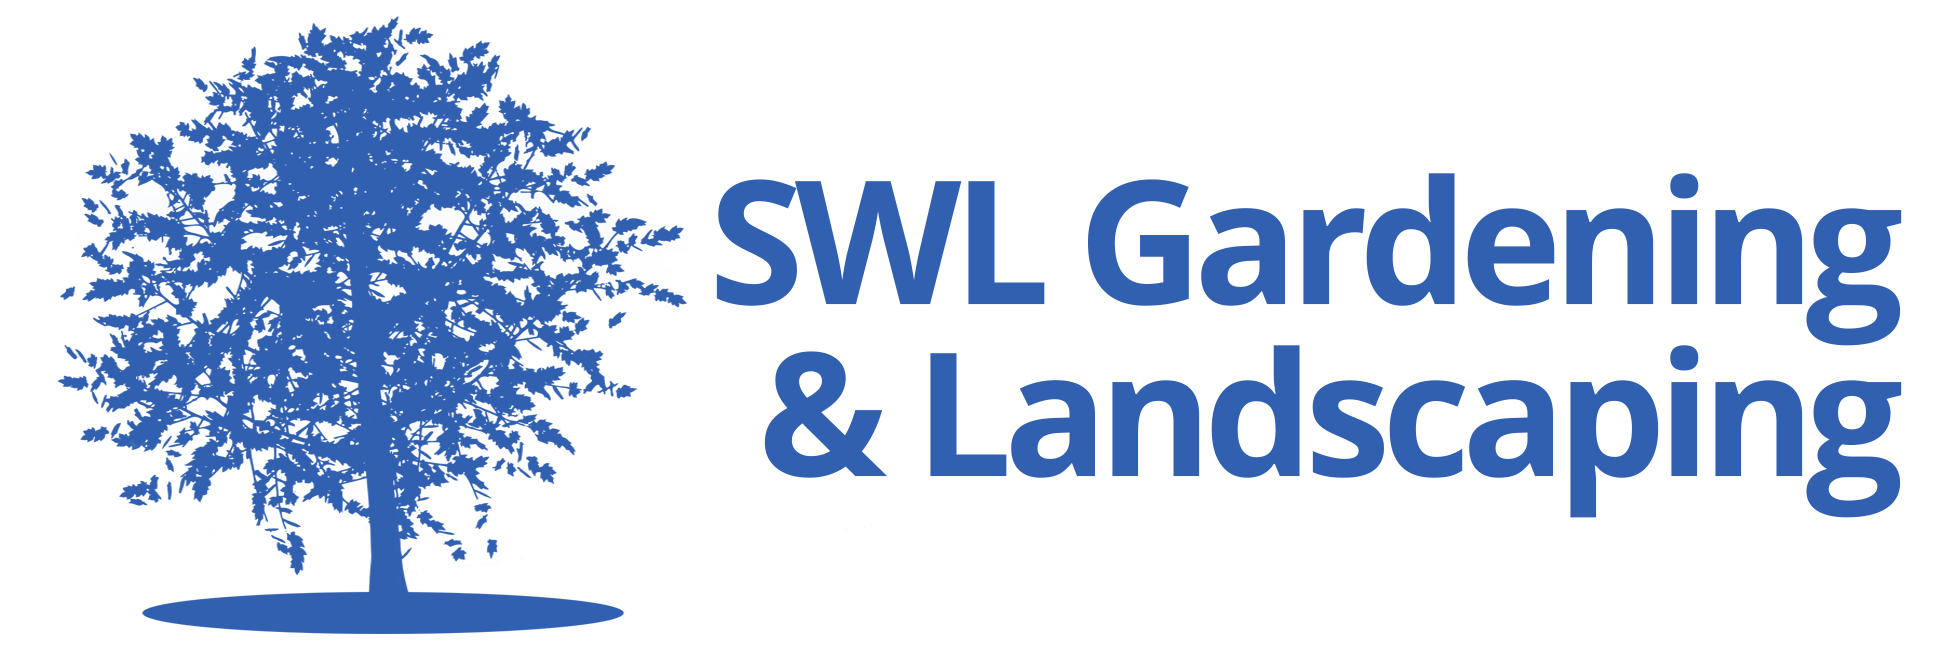 Home | SWL Gardening & Landscaping, Dromore, County Down